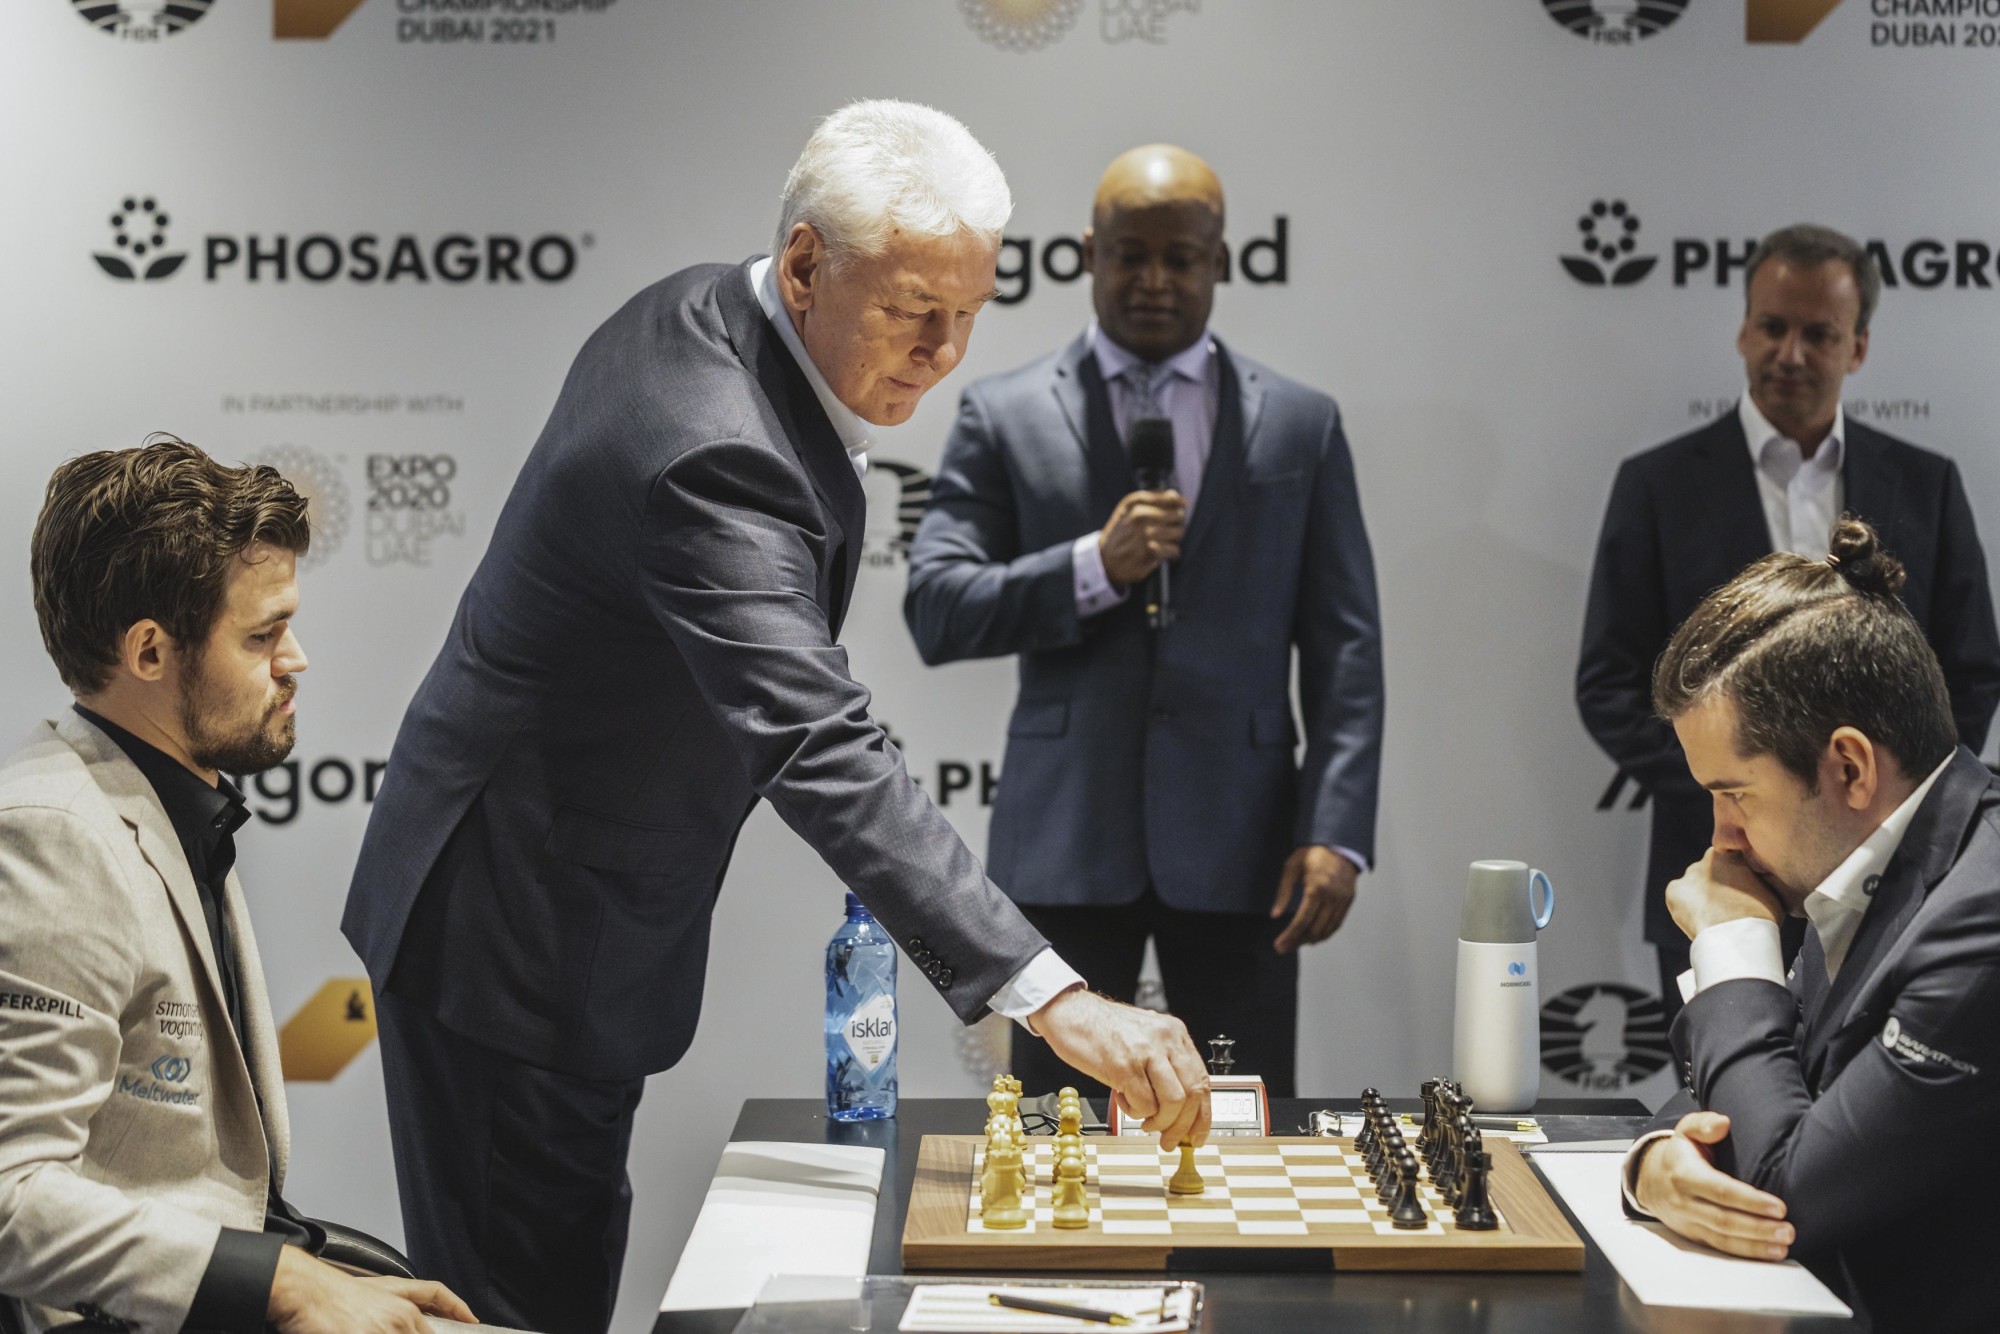 FIDE World Chess Championship first chess piece move is made by Sergey Sobyanin Mayor of Moscow for Game 6 between Magnus Carlsen (R) and Ian Nepomniachtchi (L) at Dubai Exhibition Centre (DEC) Web Image m16235